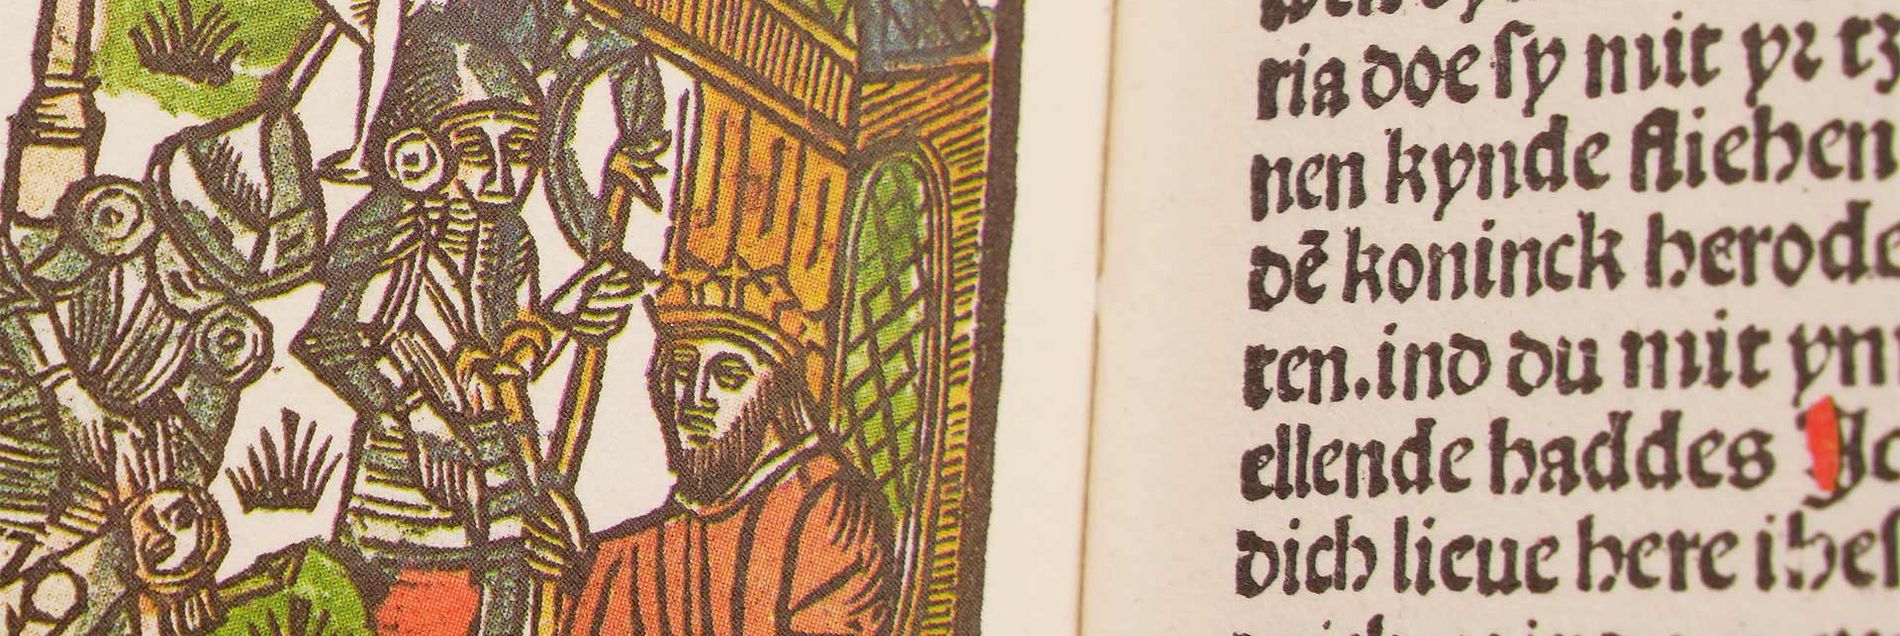 <i>“A gem of early Cologne printing with 30 finely colored woodcuts”</i>